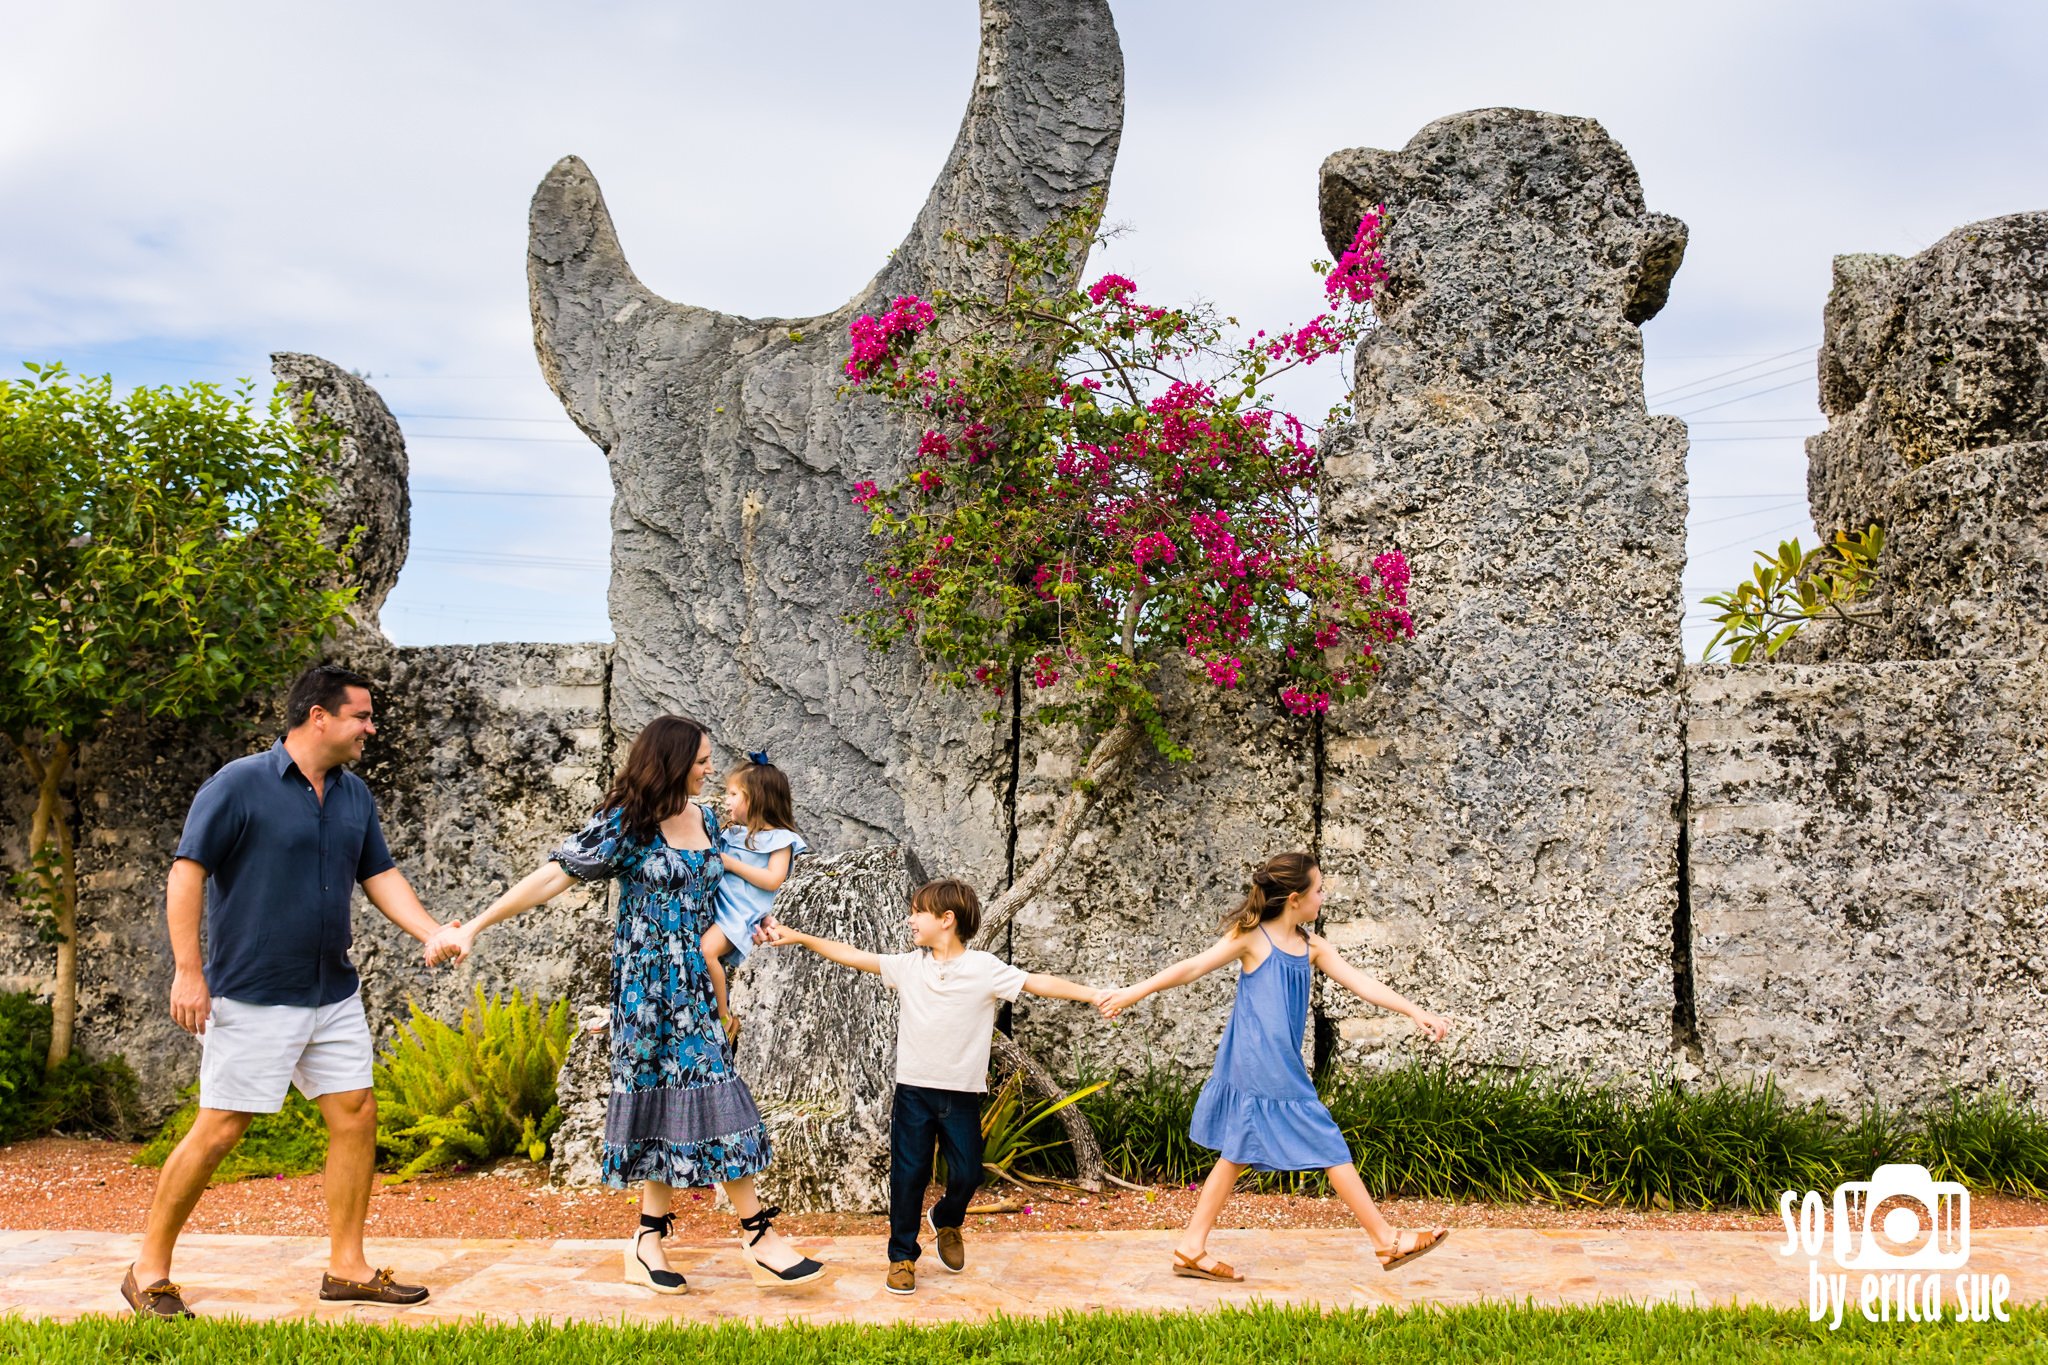 6-lifestyle-family-photographer-coral-castle-miami-fl-so-you-by-erica-sue-ES2_9001.jpg